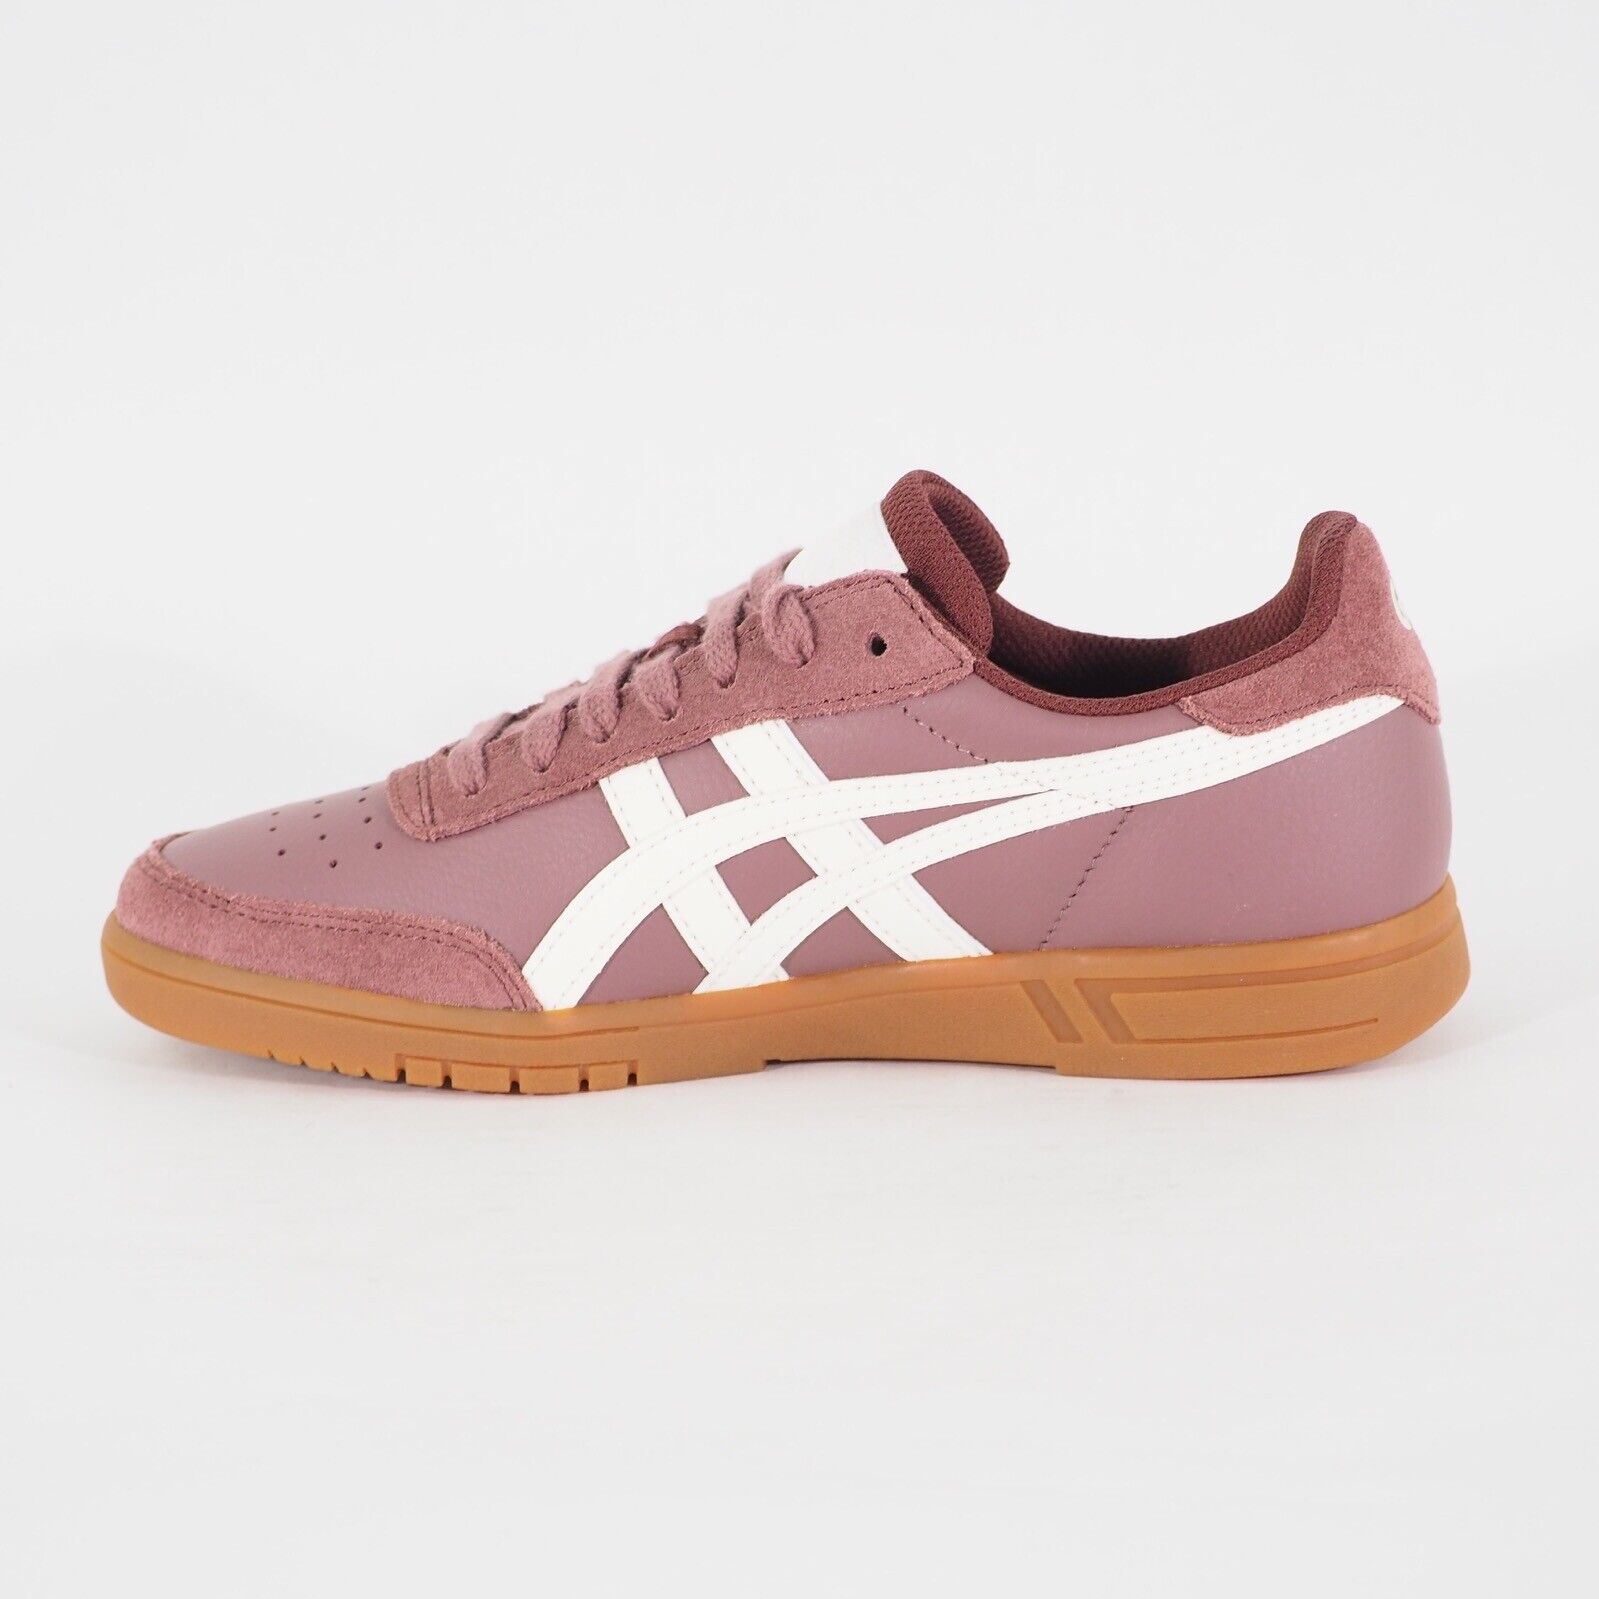 Juniors Asics Gel Vickka TRS H8A4L Rose Taupe Leather Casual Walking Trainers